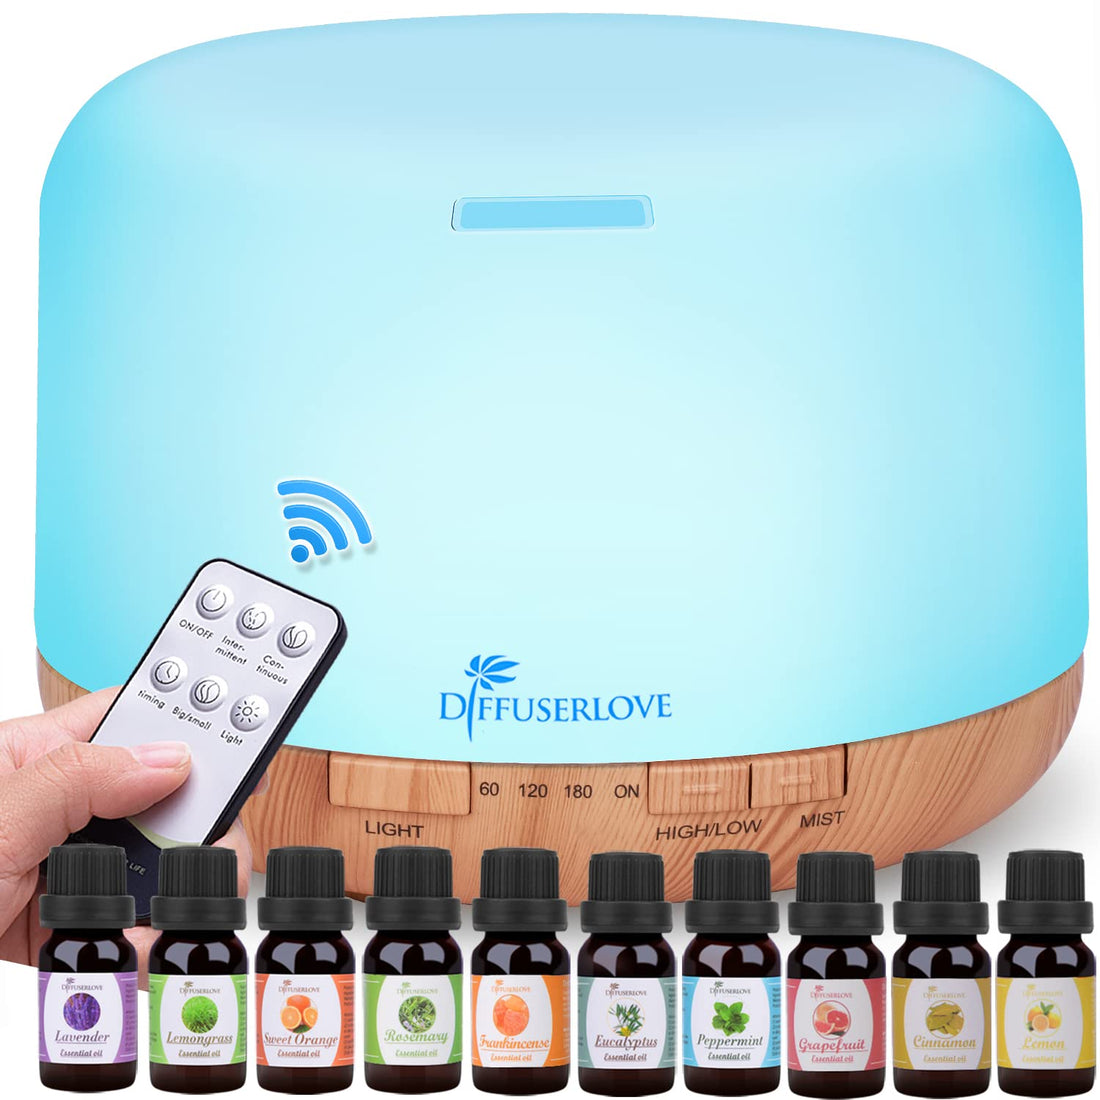 Diffuserlove 550ML Green Jade Grain Diffuser Ultrasonic Aromatherapy Essential Oil Diffuser with 4 Timer setting 7 Color LED Lights, Waterless Auto Shut-off for Office Bedroom Baby Room Yoga Pet Room